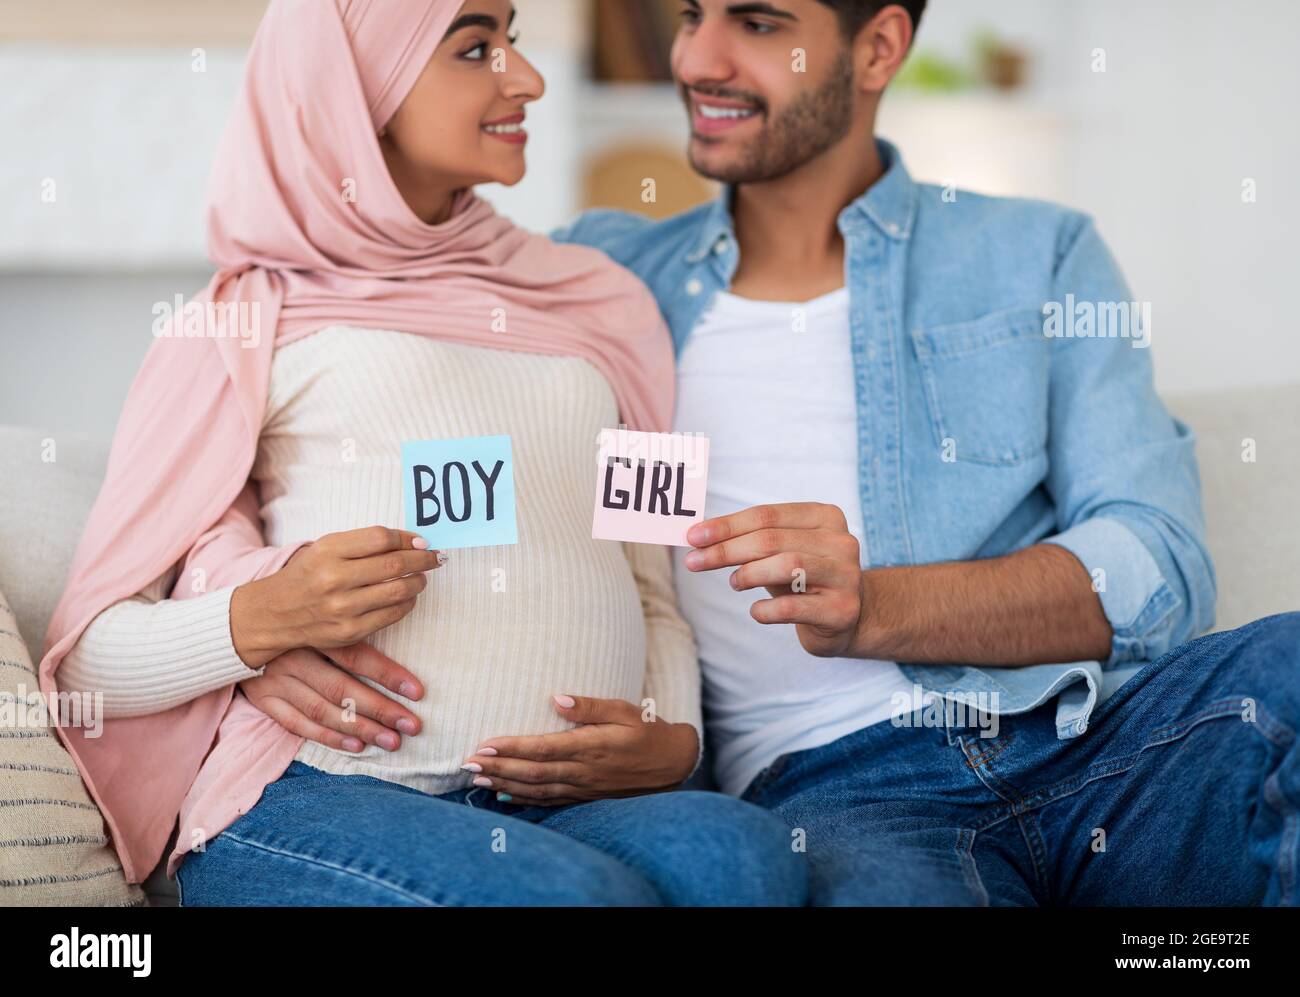 Gender reveal concept. Happy arab couple holding boy and girl sticker cards in pink and blue colors, sitting on couch Stock Photo